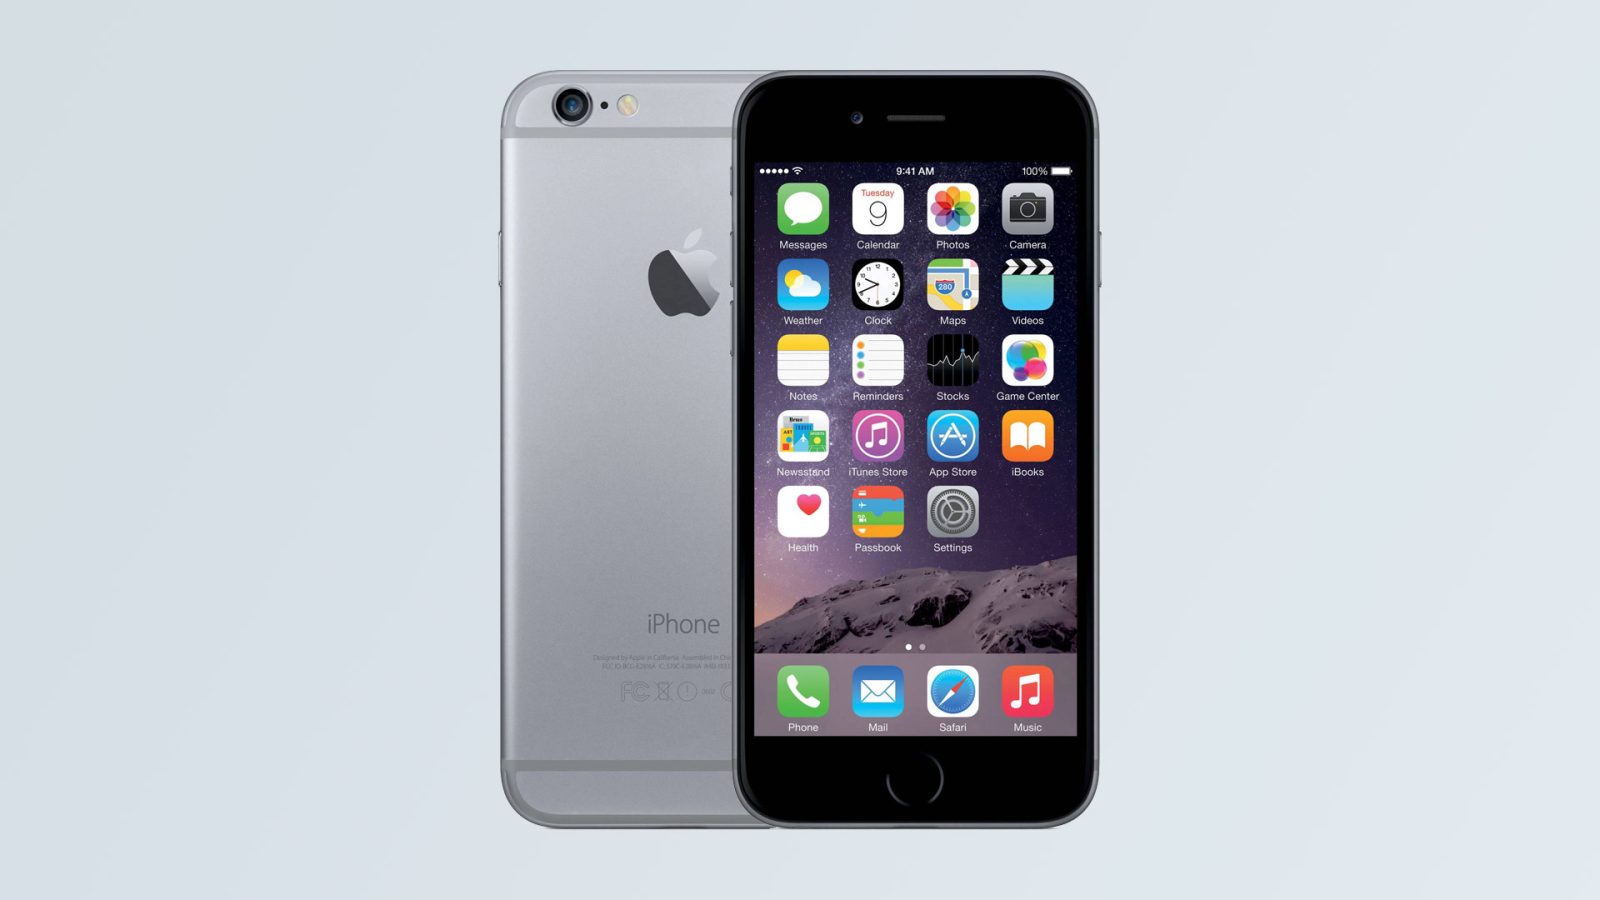 iPhone 6 is now considered a ‘Vintage’ product by Apple